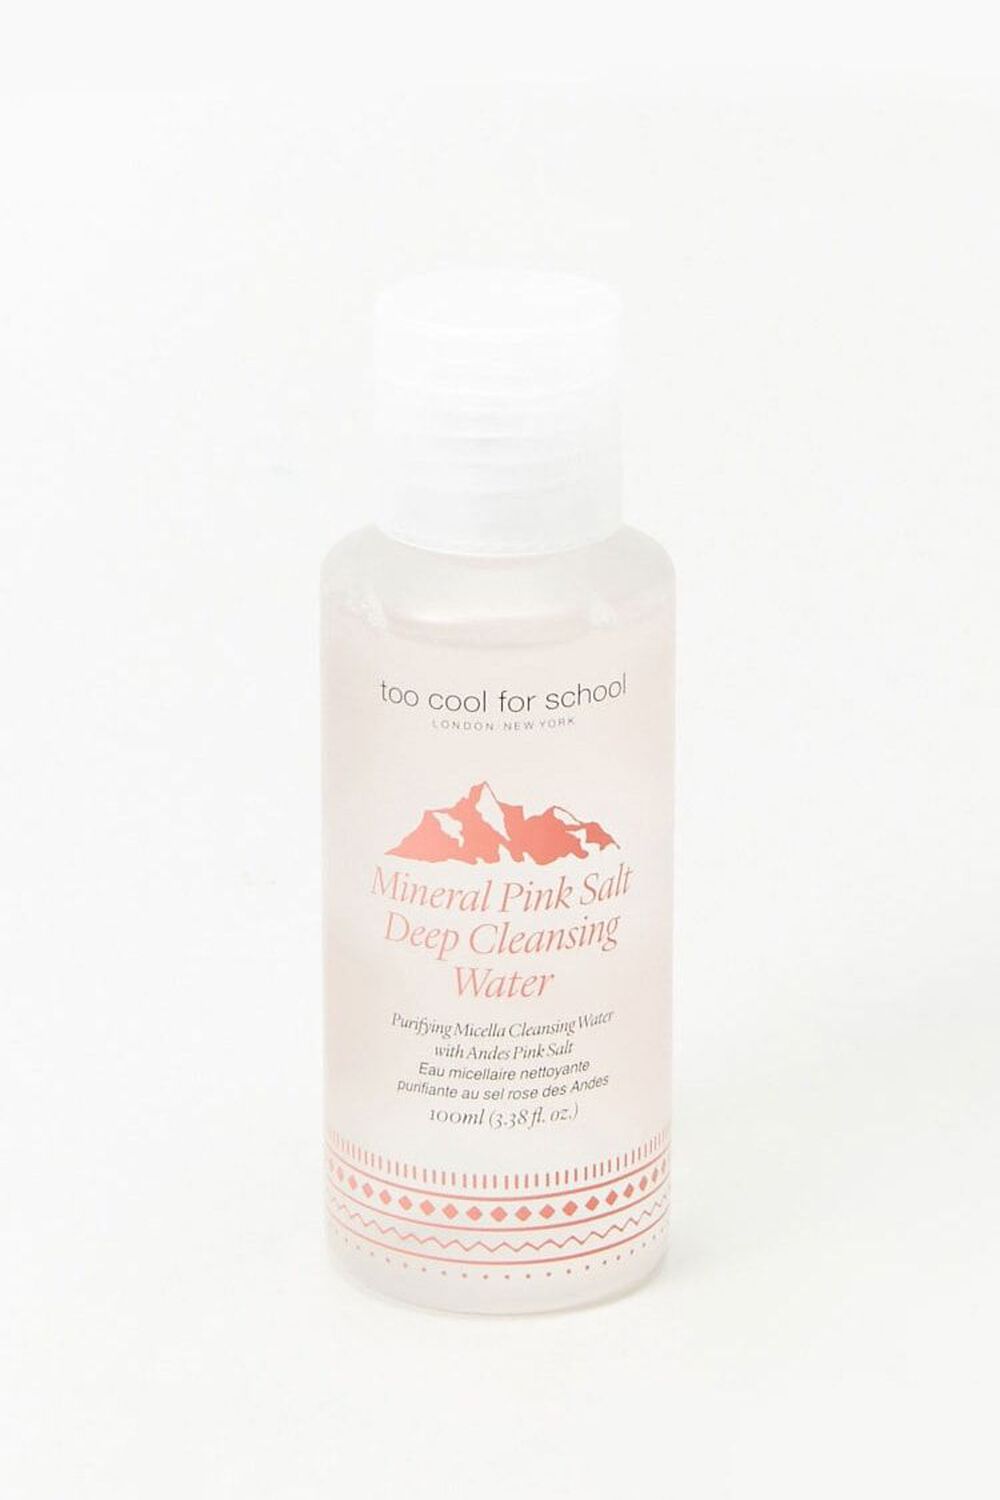 CLEAR Mineral Pink Salt Deep Cleansing Water, image 1